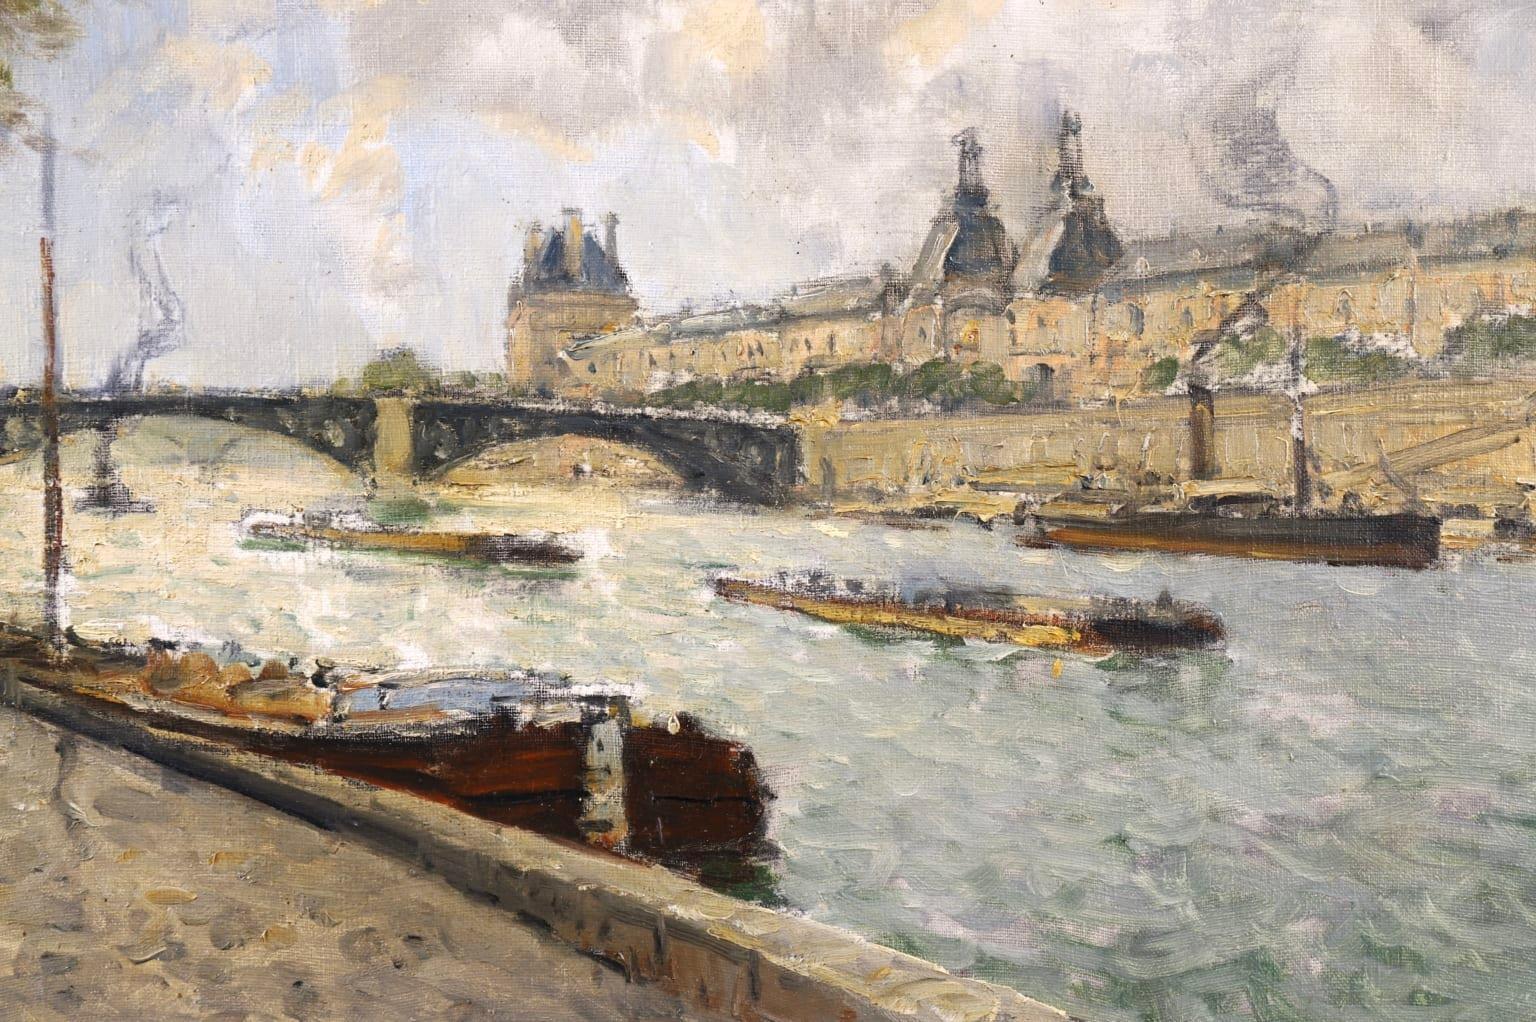 View of the Seine, Paris - Impressionist Oil, Riverscape by Frank Myers Boggs 6